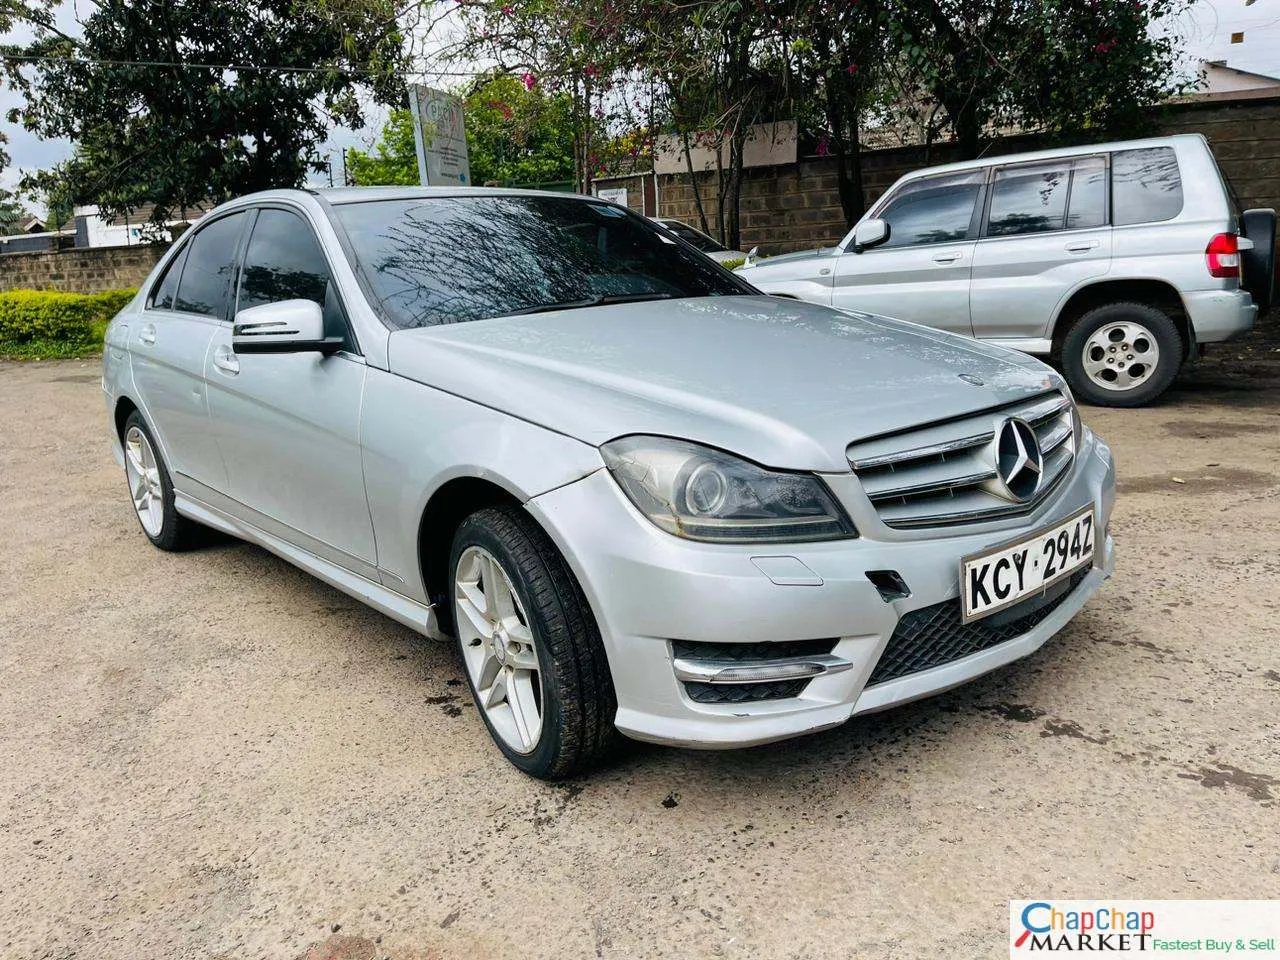 Cars Cars For Sale-Mercedes Benz C200 for sale in kenya hire purchase installments 🔥 You Pay 30% DEPOSIT Trade in OK EXCLUSIVE 9